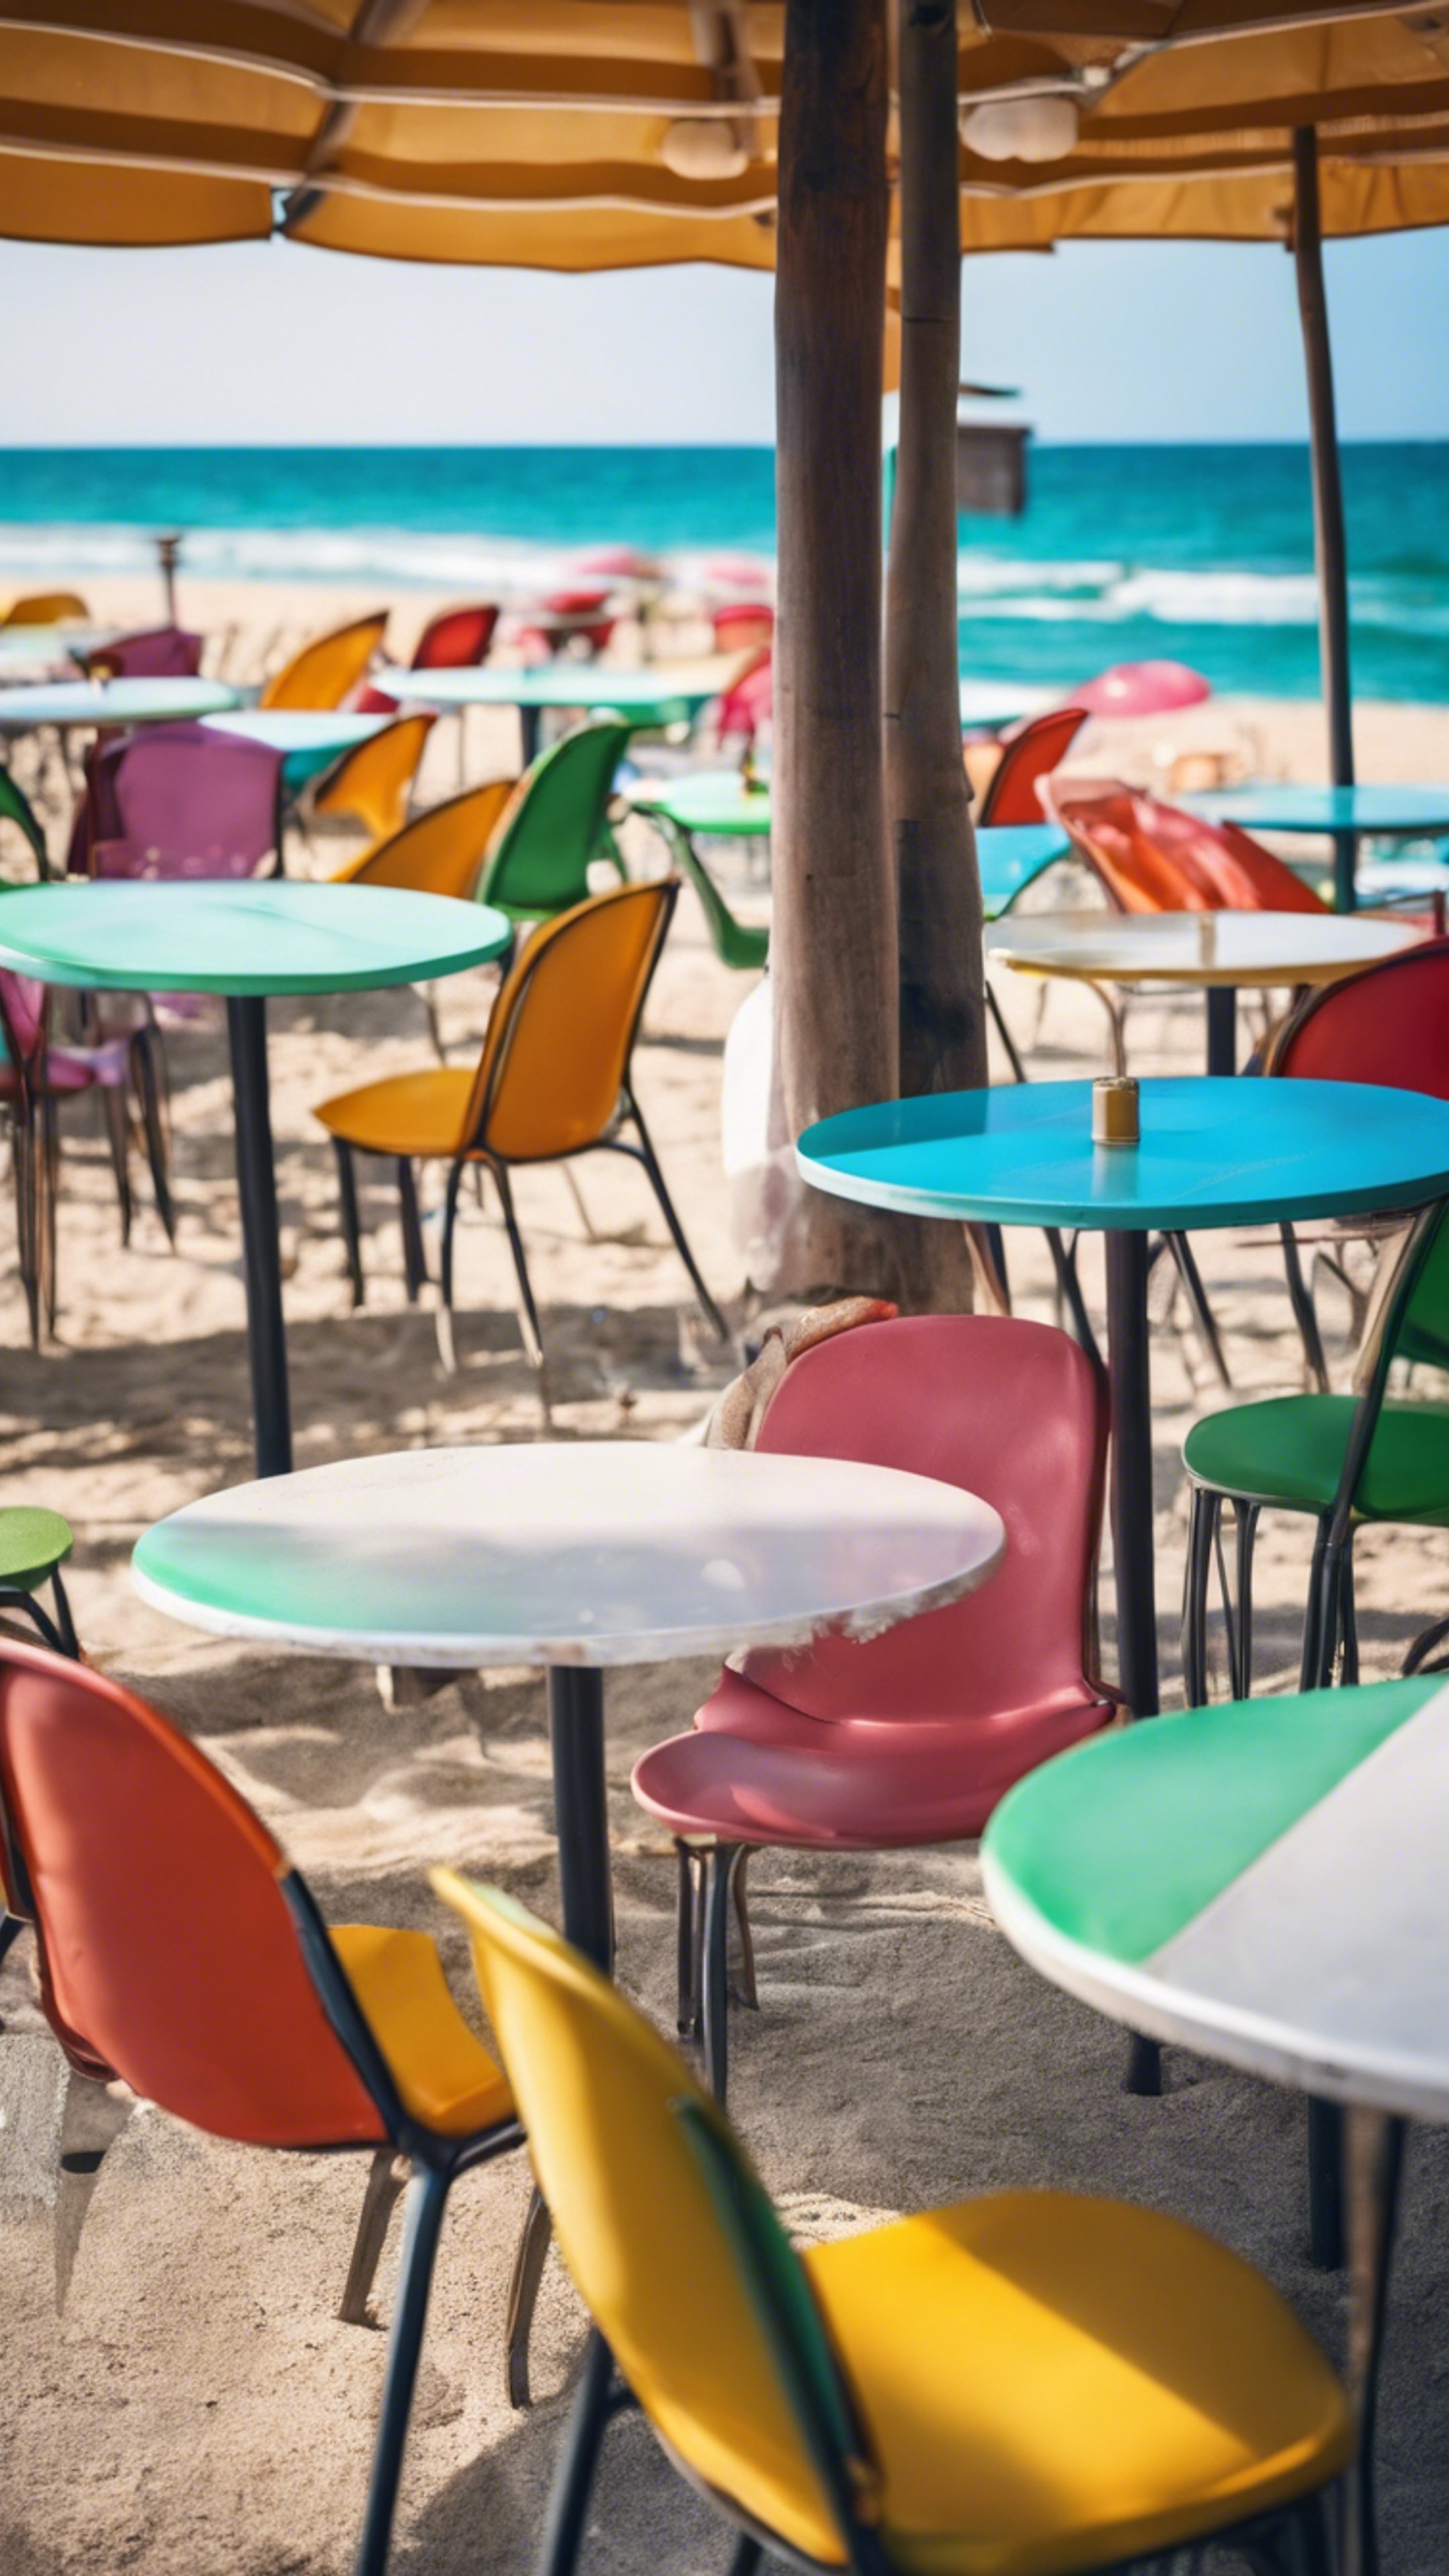 A beach side cafe with colorful chairs, umbrellas, and a panoramic view of the ocean. Tapet[e8a344cbd52d49a3867e]